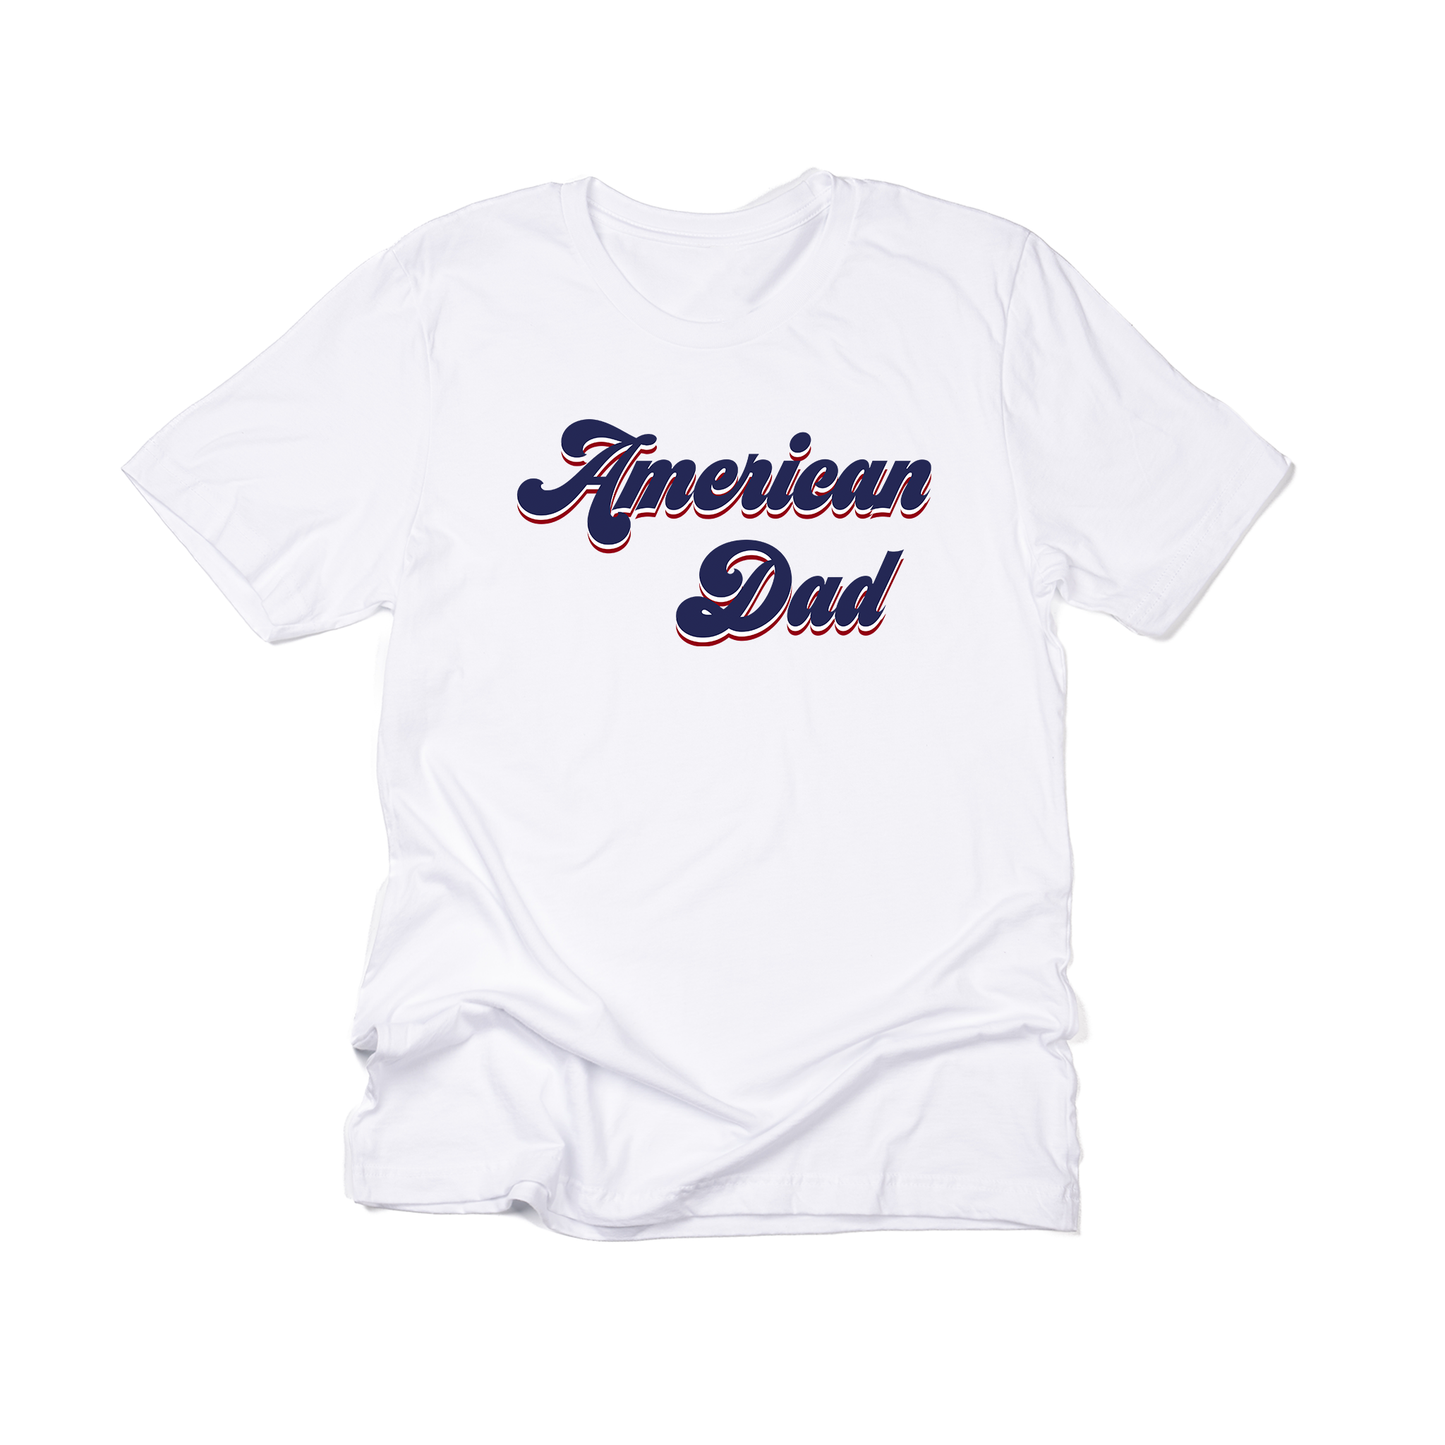 American Dad (Blue) - Tee (White)